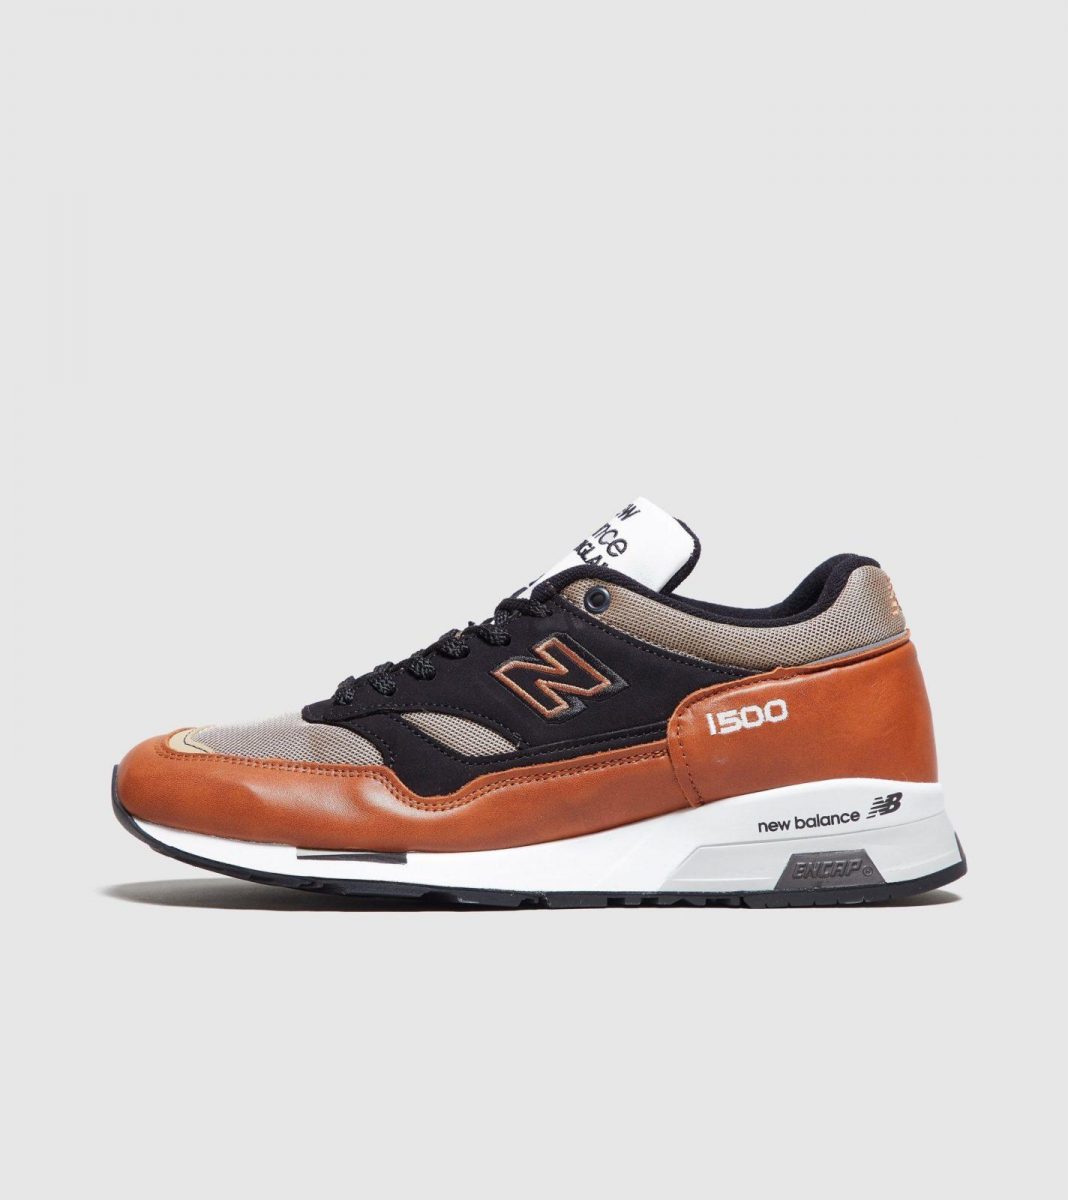 New Balance 1500 - Made in England 